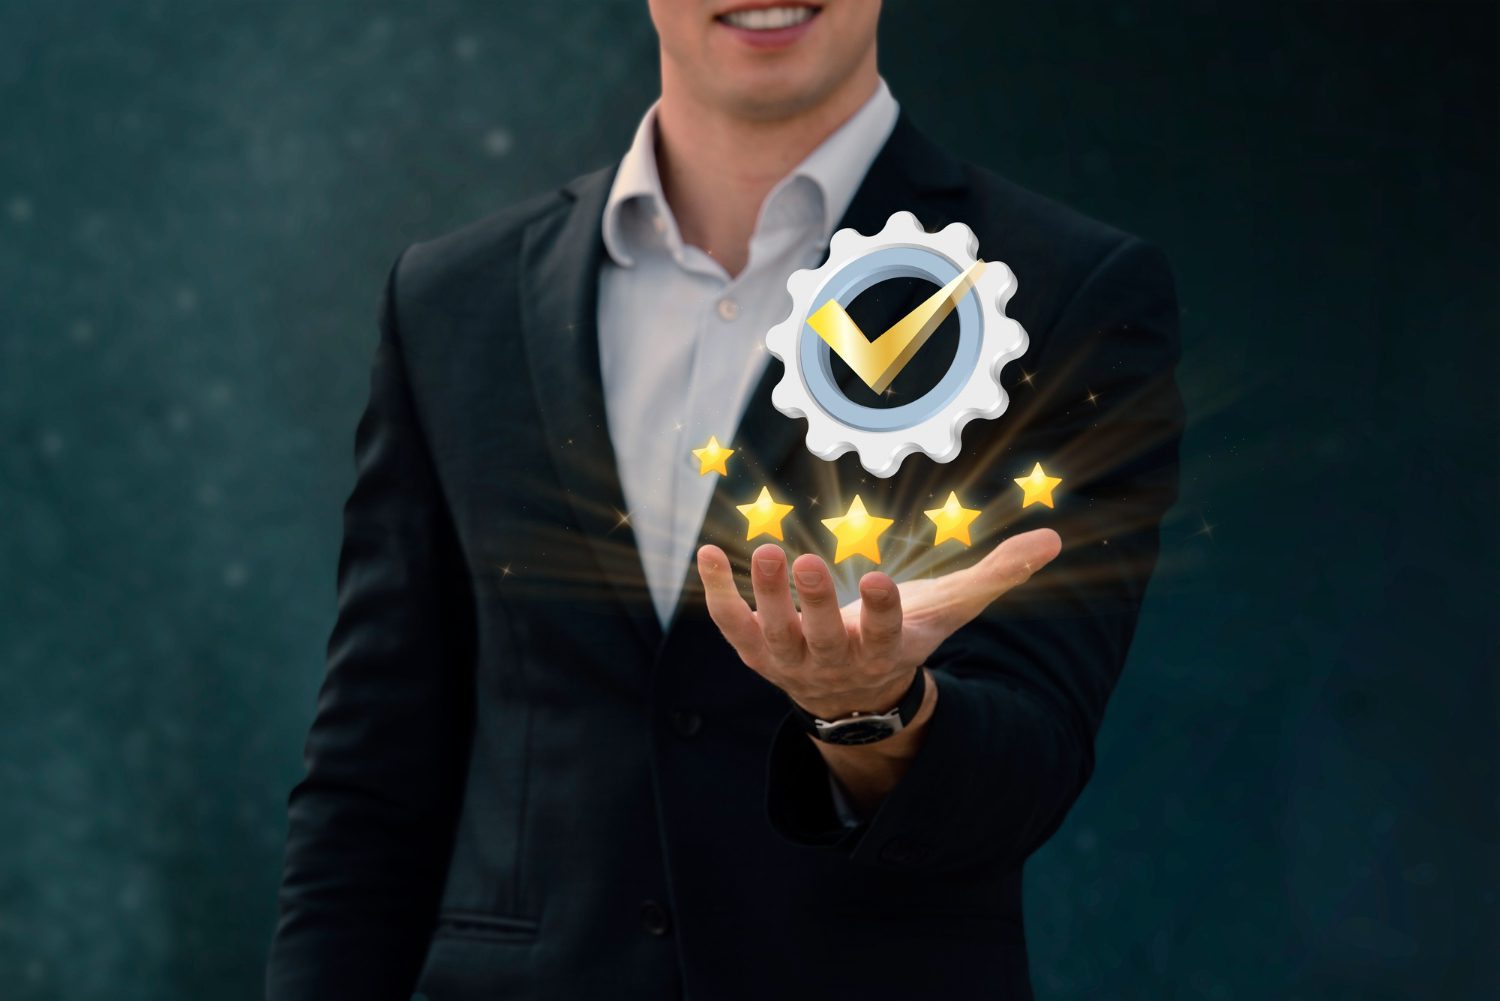 A businessman holds a gear wheel with stars on it.
